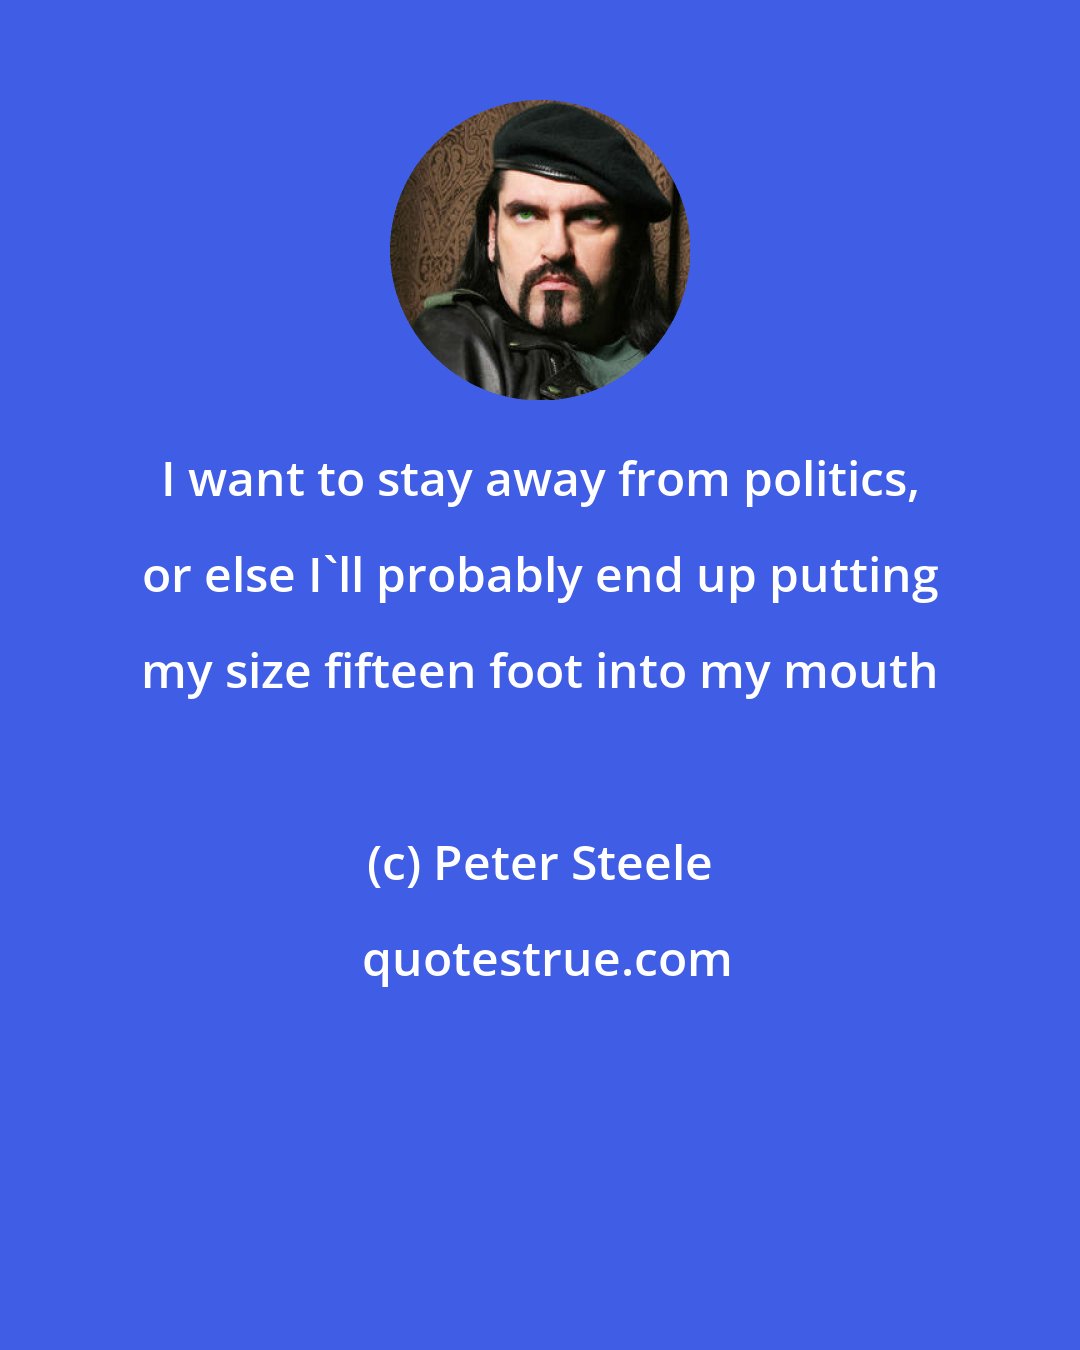 Peter Steele: I want to stay away from politics, or else I'll probably end up putting my size fifteen foot into my mouth